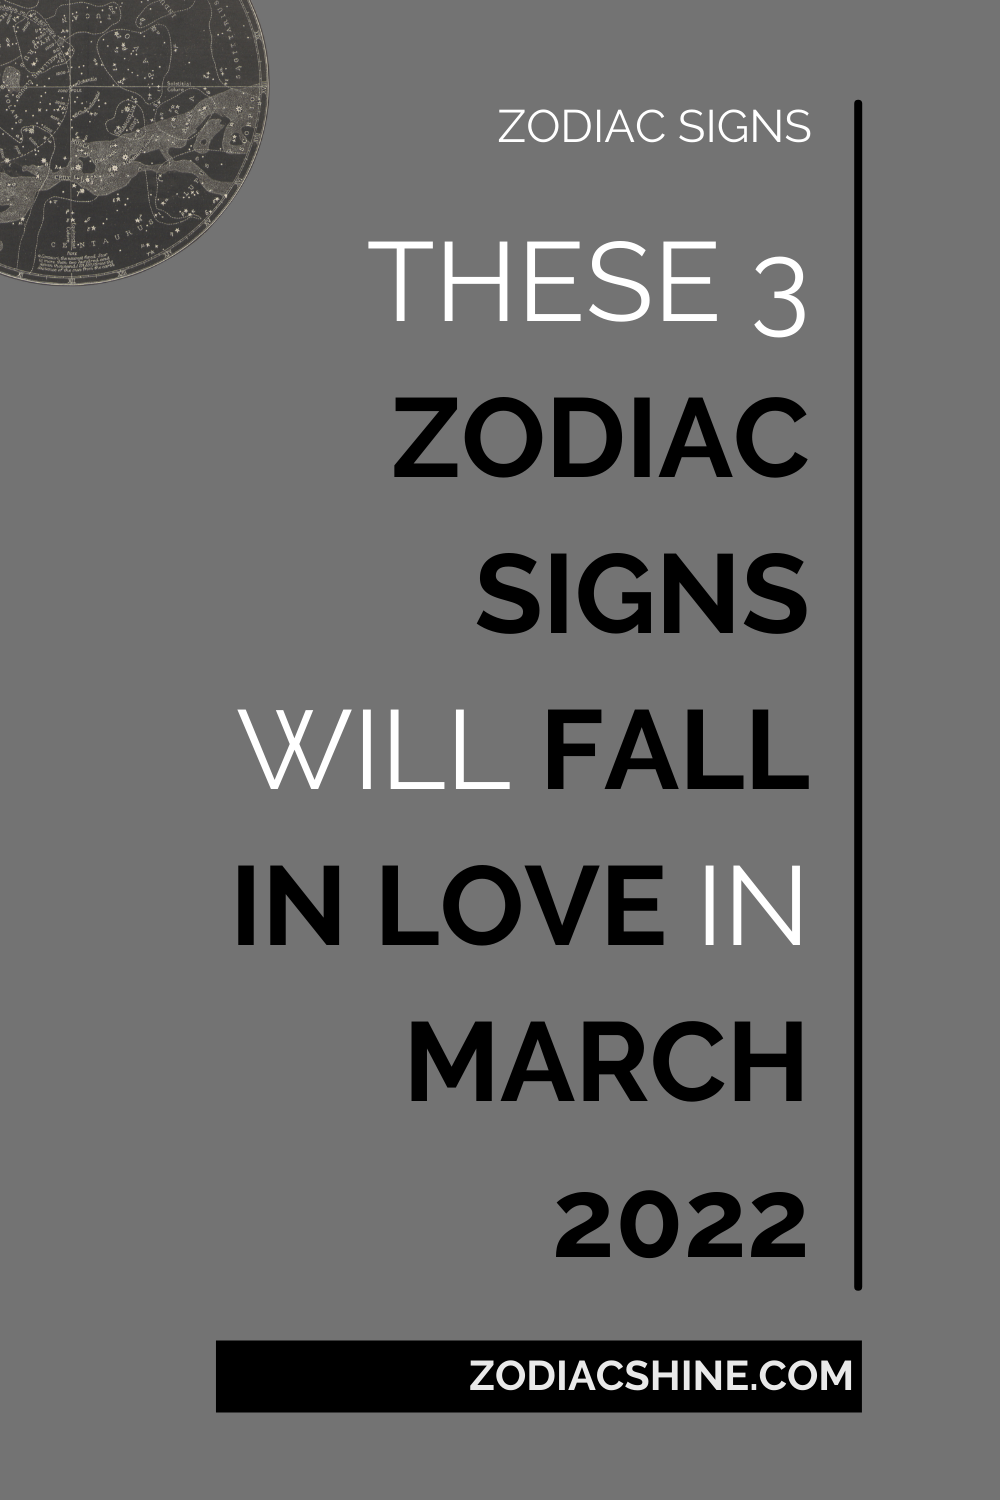 These 3 Zodiac Signs Will Fall In Love In March 2022